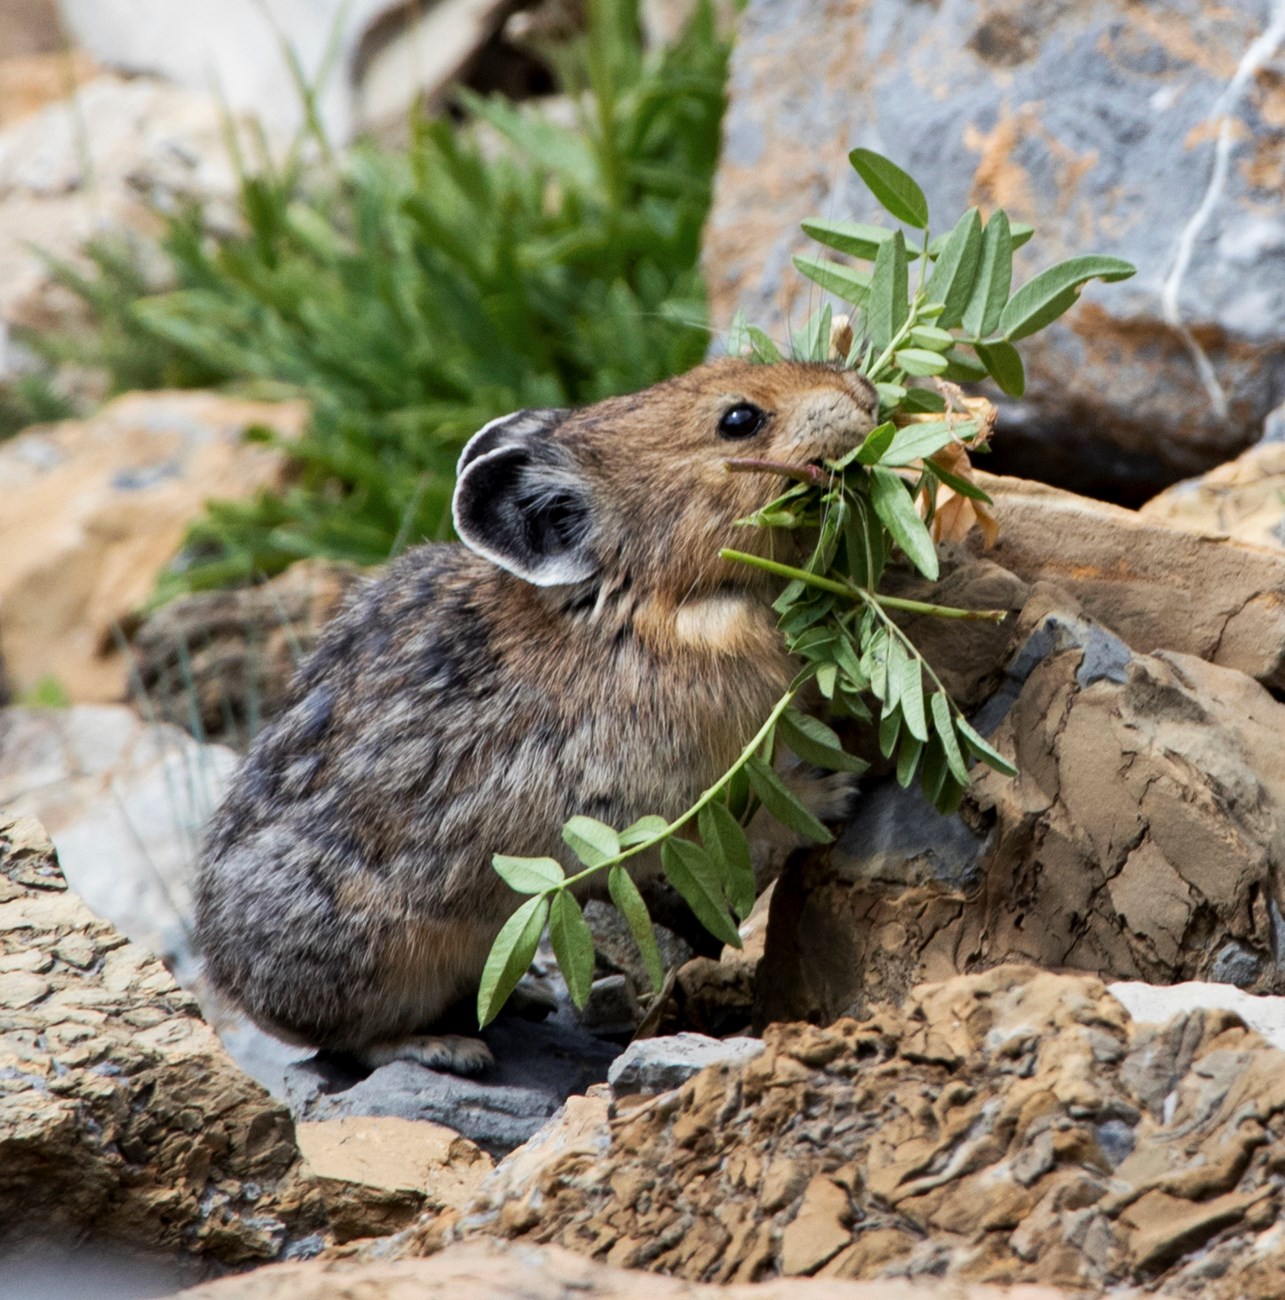 A small, brown and gray, potato-sized critter holds a large bundle of vegetation in its mouth.